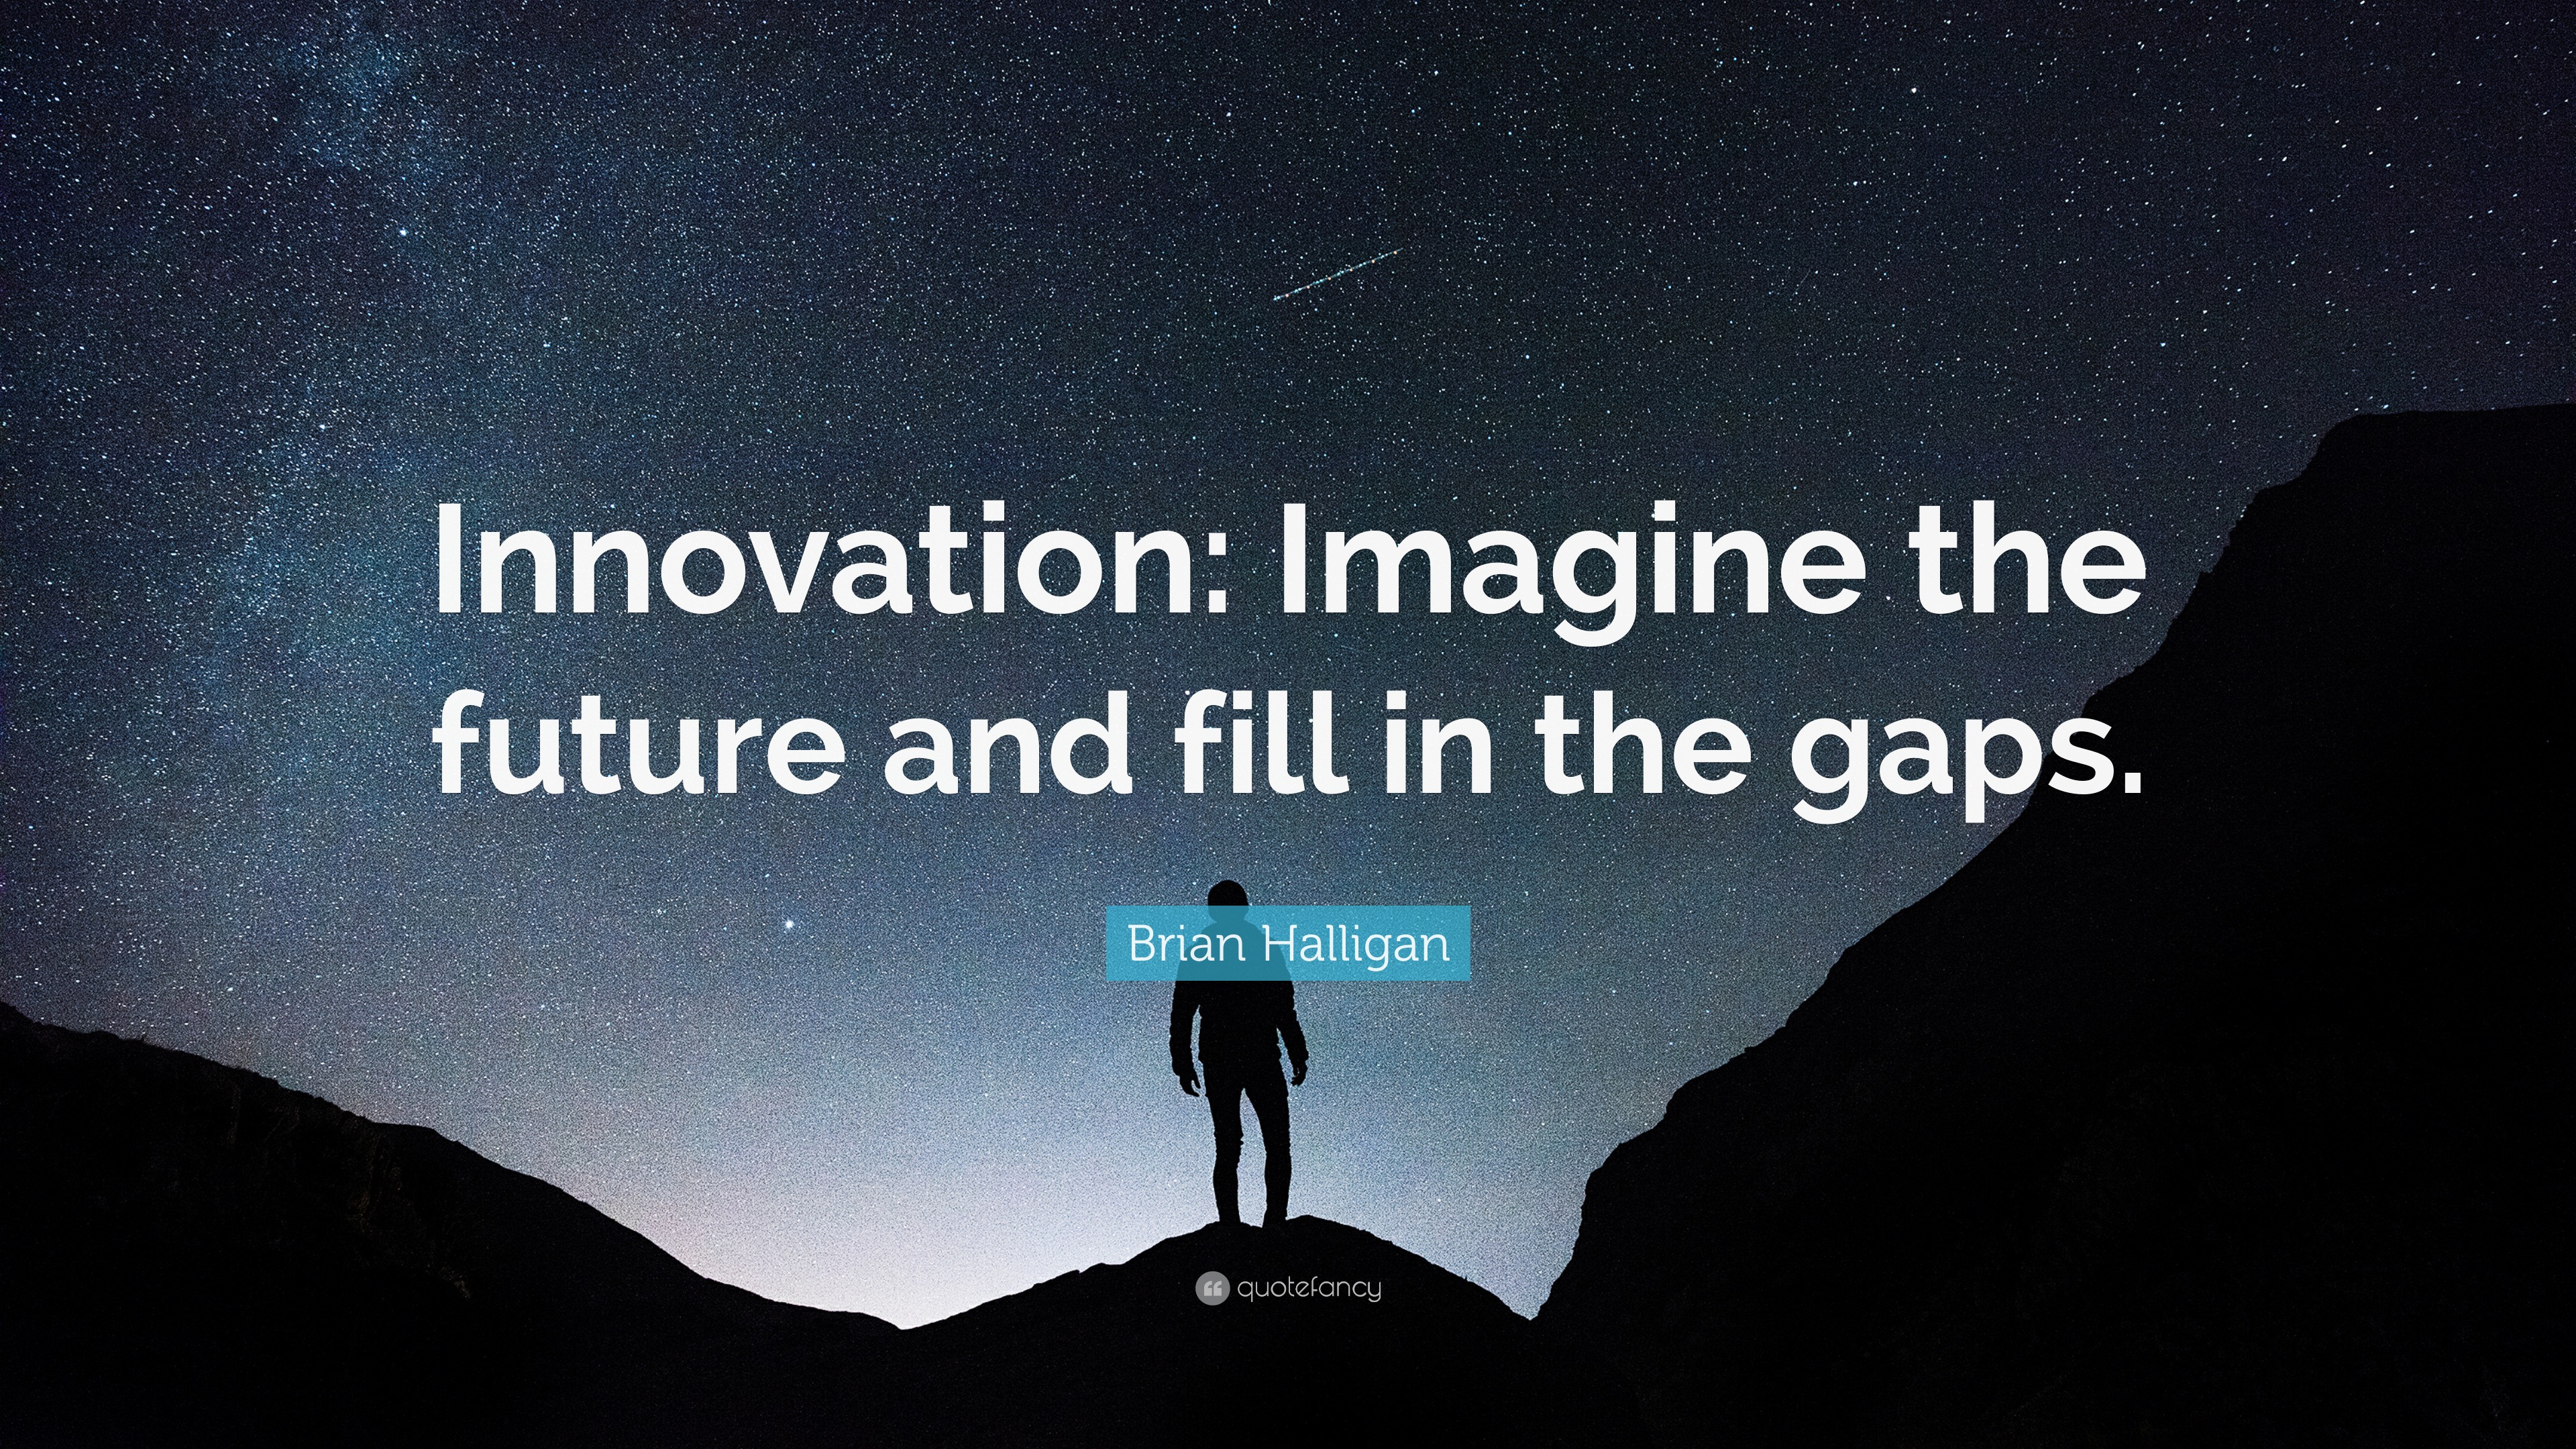 Brian Halligan Quote: “Innovation: Imagine the future and fill in the